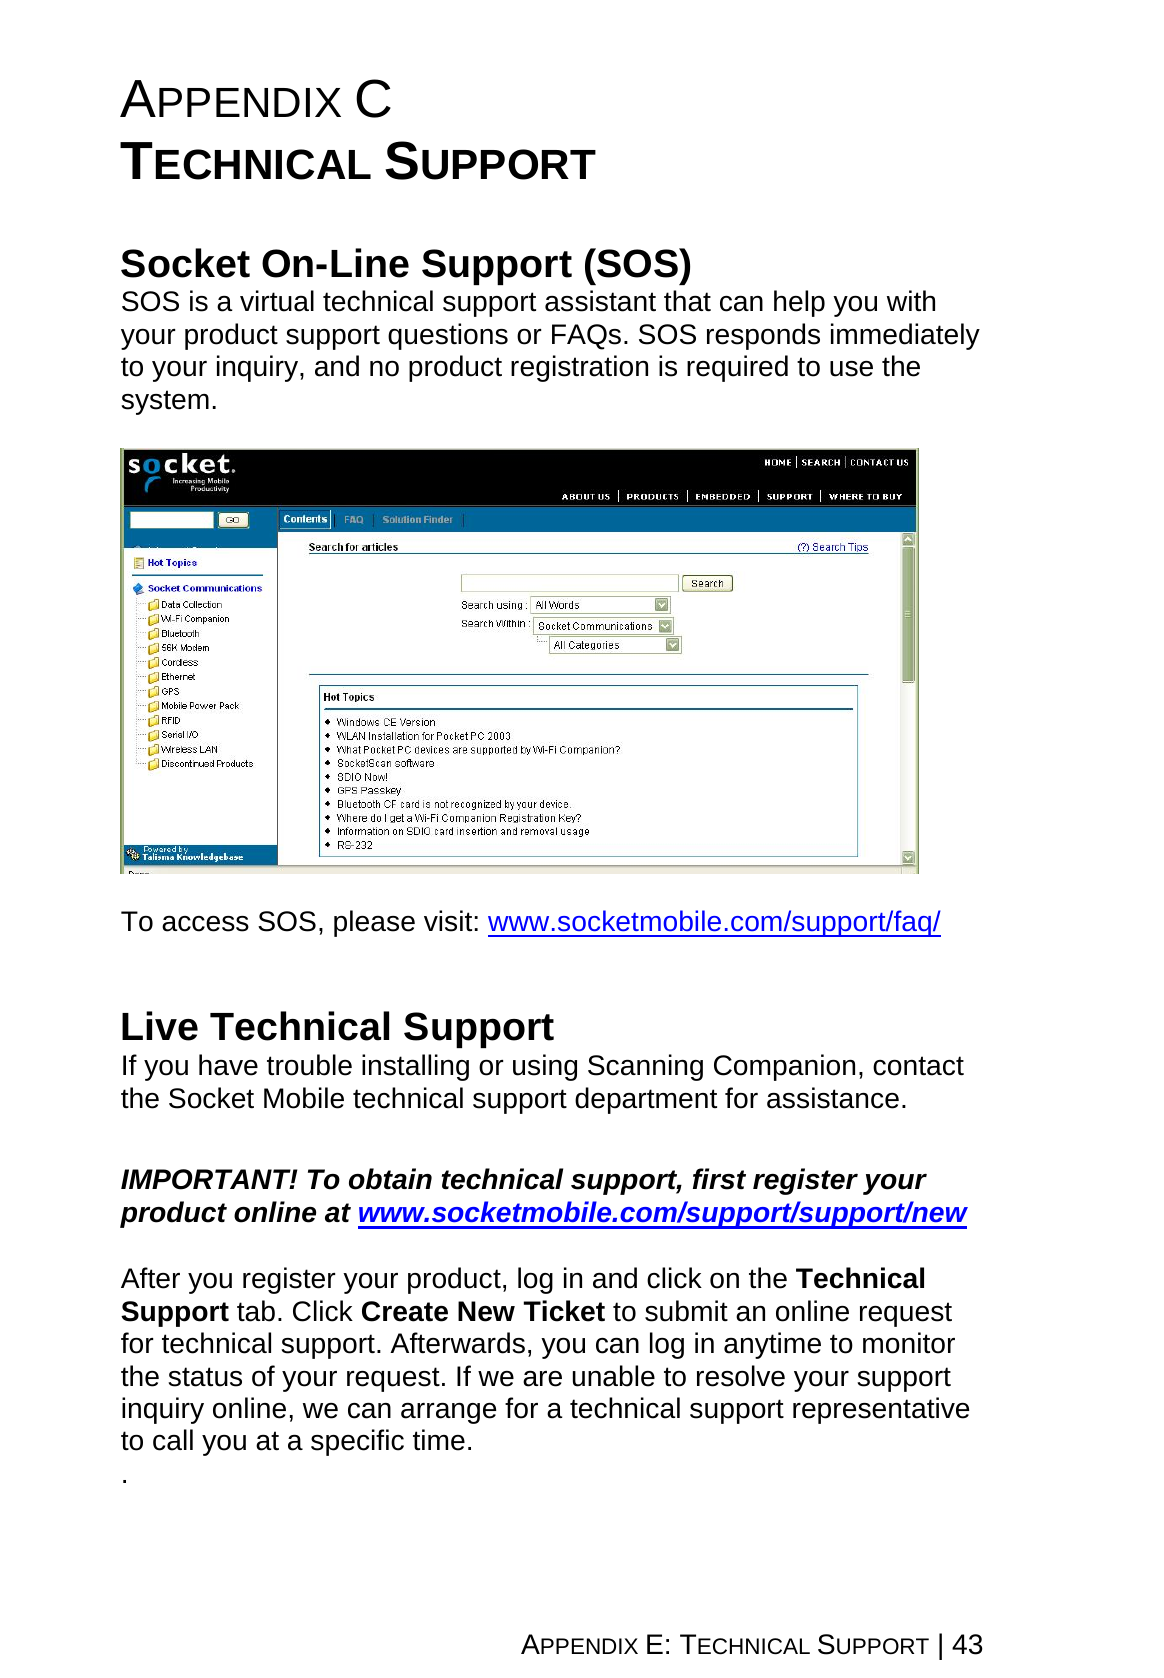 APPENDIX E: TECHNICAL SUPPORT | 43 APPENDIX C  TECHNICAL SUPPORT   Socket On-Line Support (SOS) SOS is a virtual technical support assistant that can help you with your product support questions or FAQs. SOS responds immediately to your inquiry, and no product registration is required to use the system.    To access SOS, please visit: www.socketmobile.com/support/faq/   Live Technical Support If you have trouble installing or using Scanning Companion, contact the Socket Mobile technical support department for assistance.   IMPORTANT! To obtain technical support, first register your product online at www.socketmobile.com/support/support/new  After you register your product, log in and click on the Technical Support tab. Click Create New Ticket to submit an online request for technical support. Afterwards, you can log in anytime to monitor the status of your request. If we are unable to resolve your support inquiry online, we can arrange for a technical support representative to call you at a specific time. .